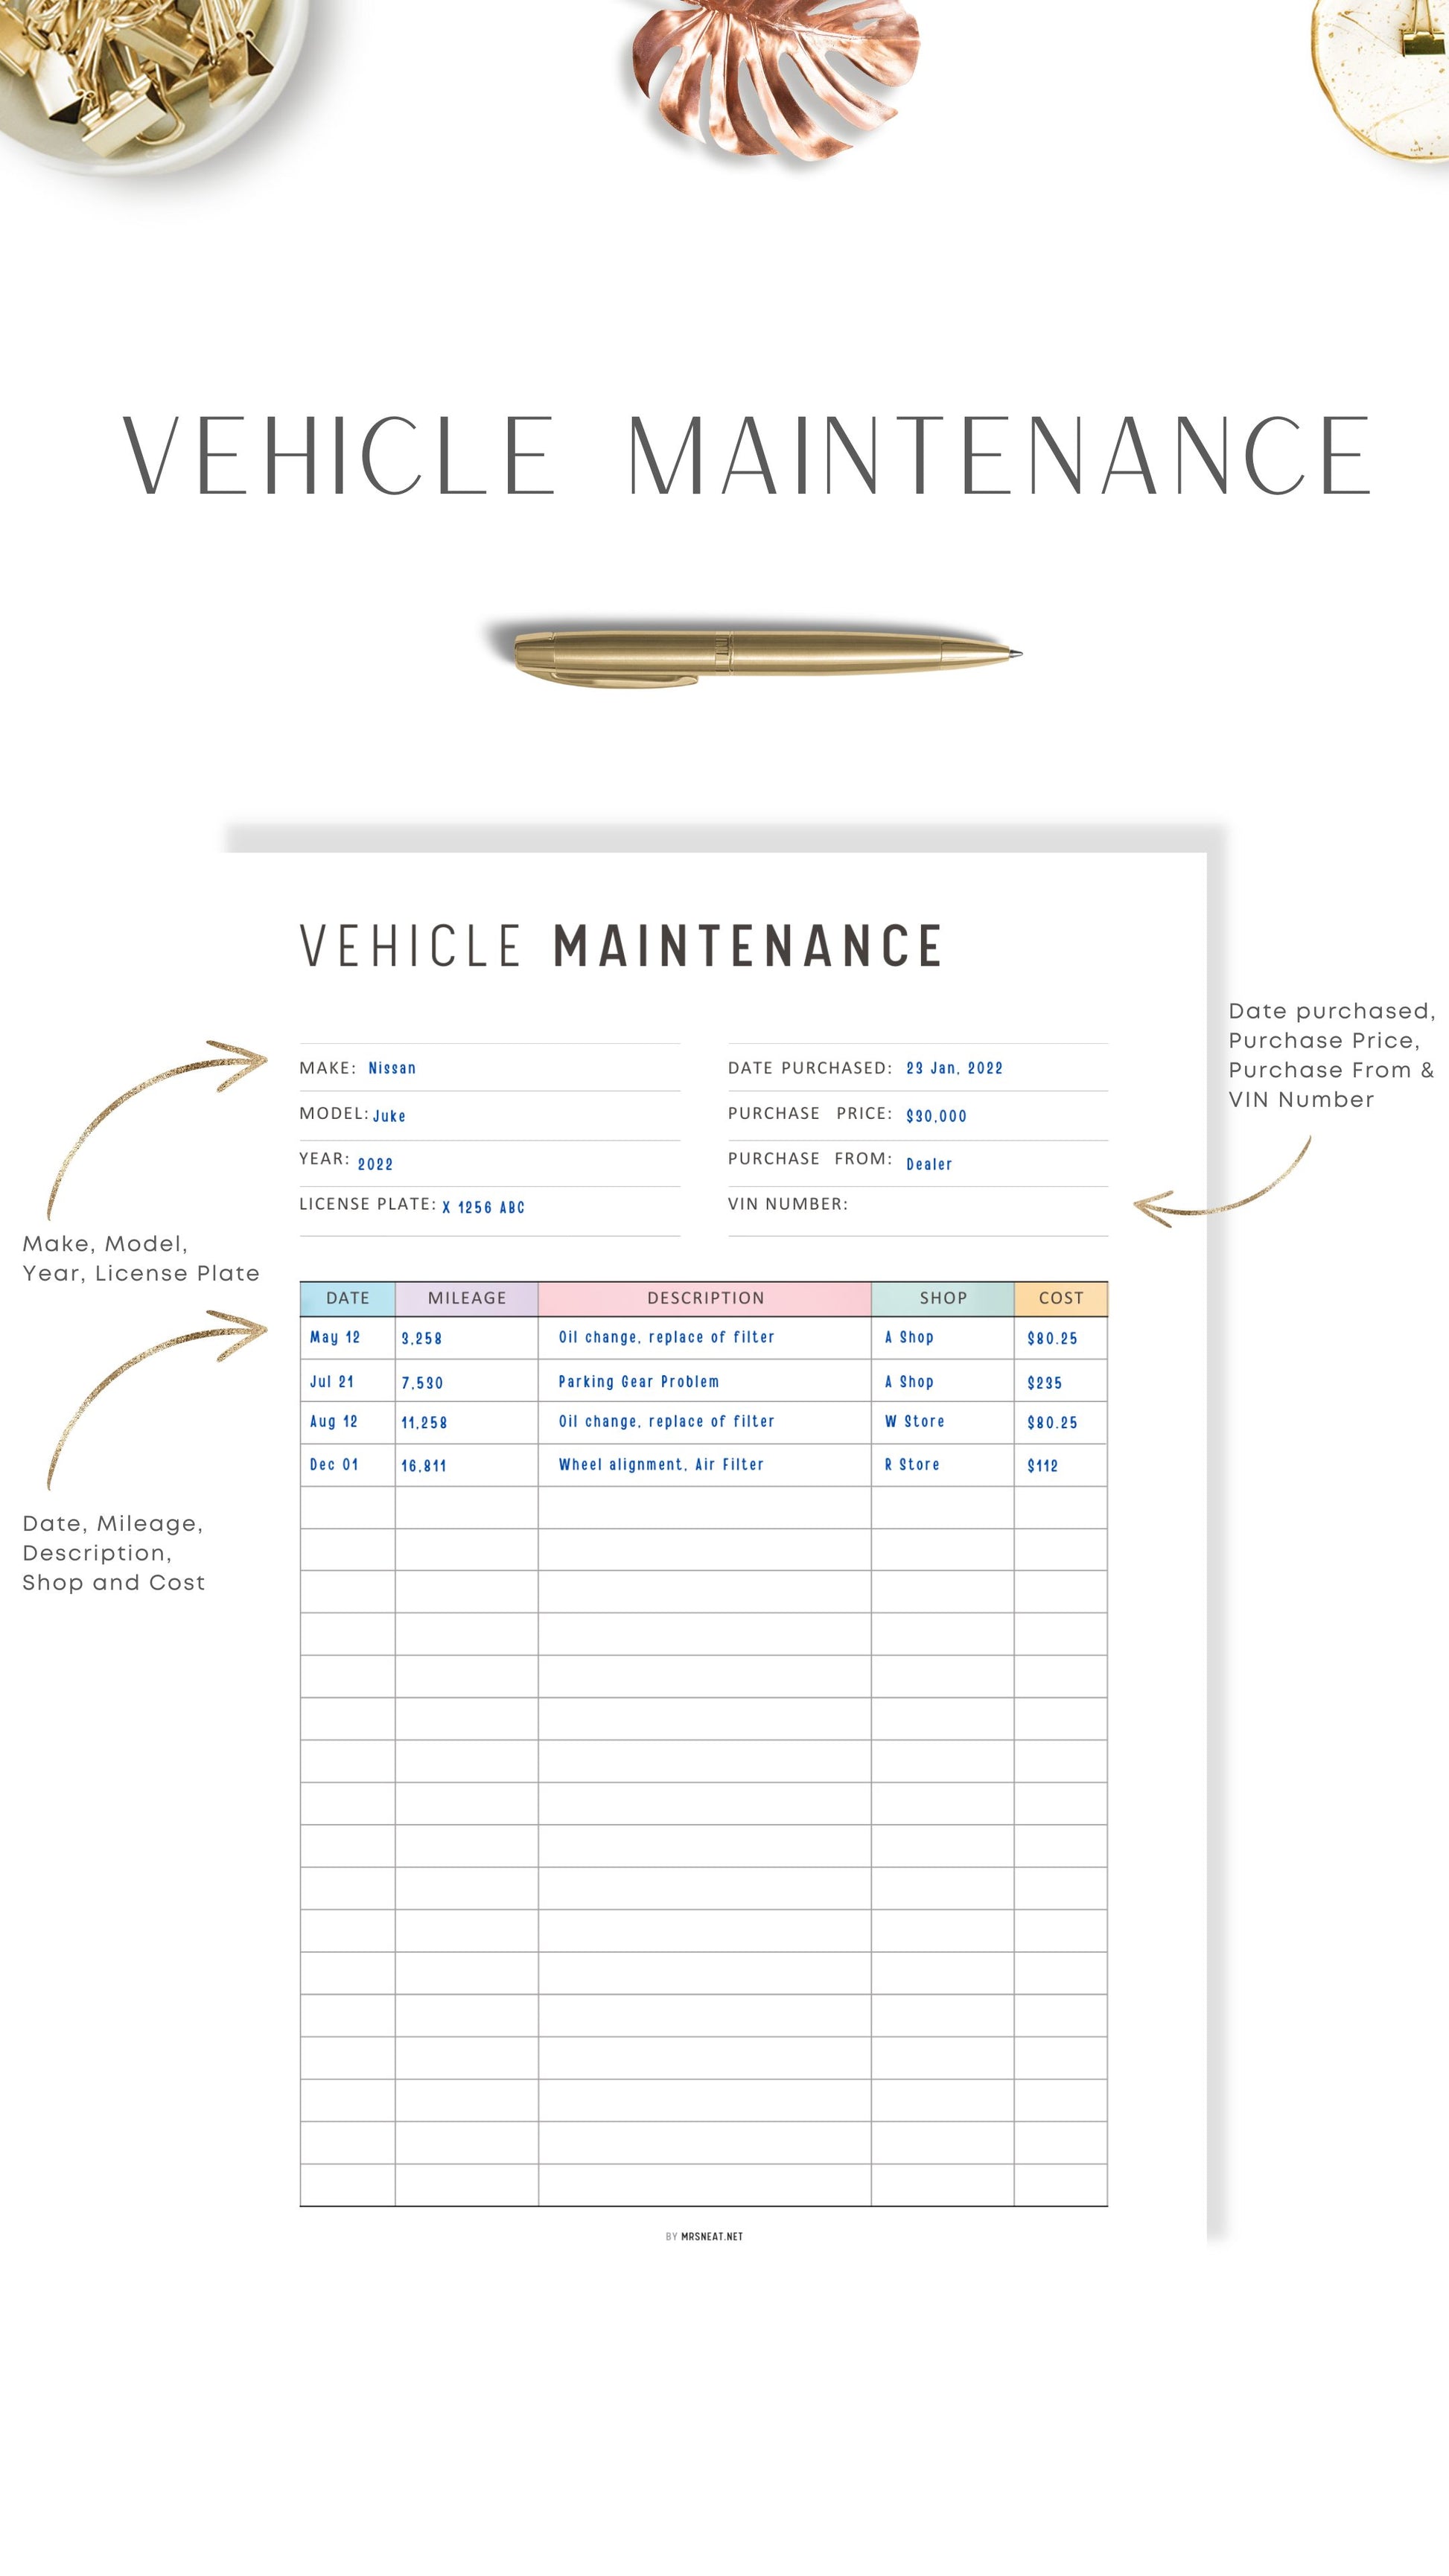 How to use Colorful Vehicle Maintenance Template Printable